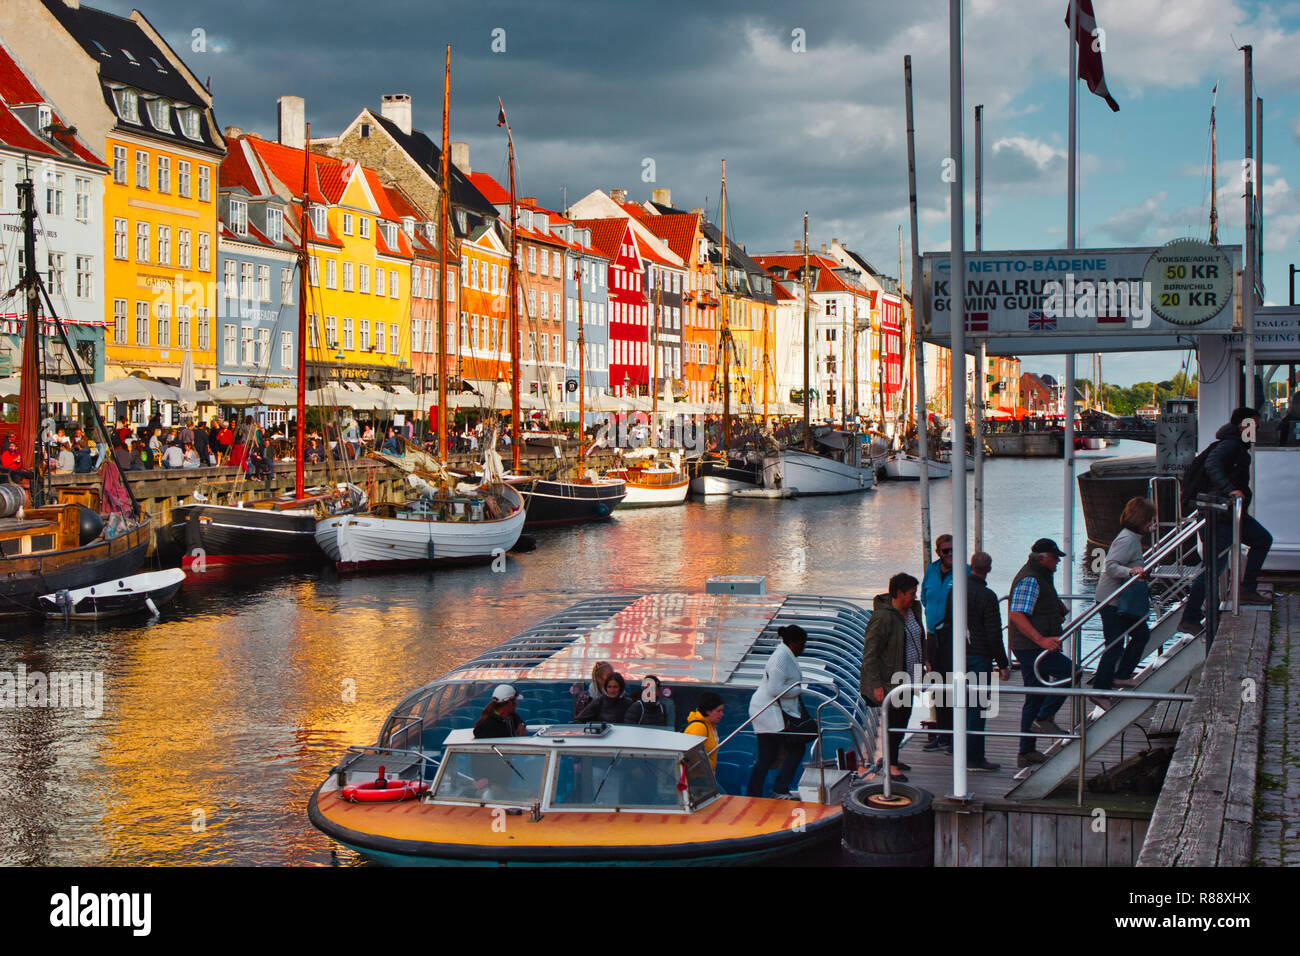 Tourists sightseeing boat and brightly coloured townhouses, Nyhavn Canal, Nyhavn, Copenhagen, Denmark, Scandinavia Stock Photo